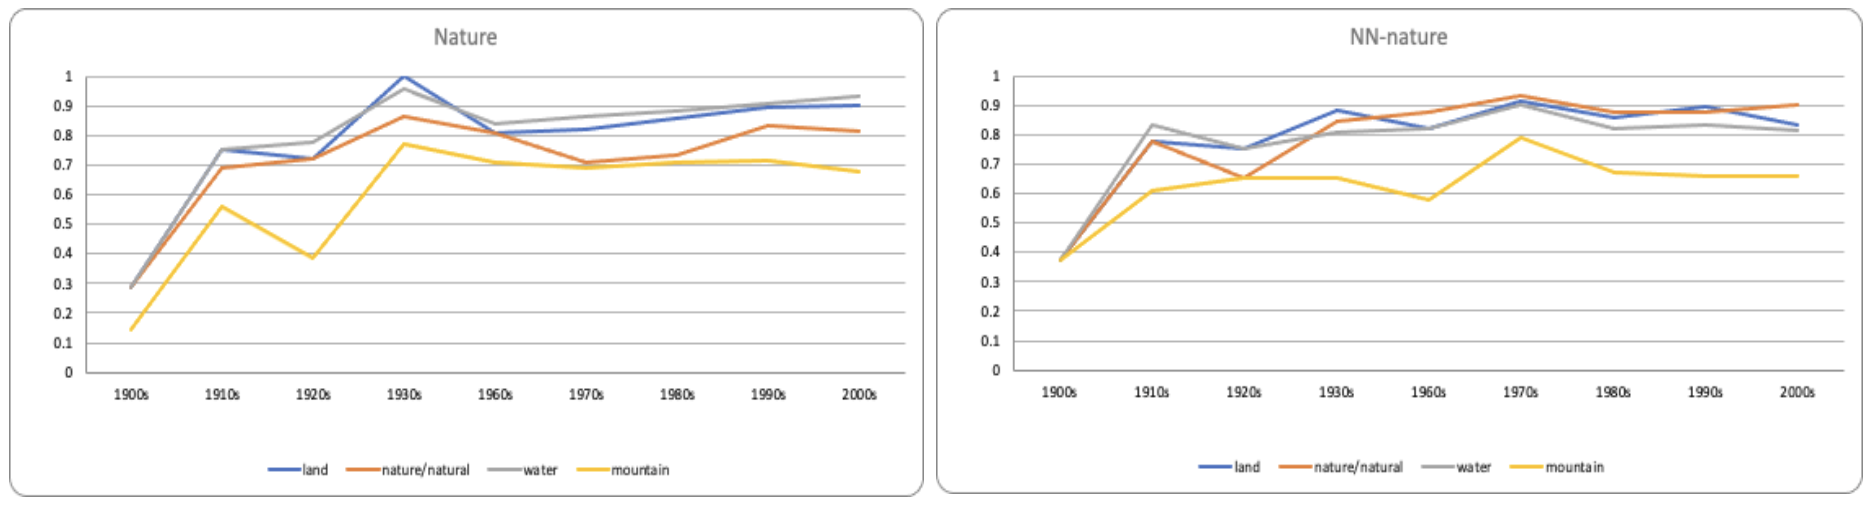 Nature terms were frequently used in both worksets. (Left picture shows the term usage in the Native-authored workset, right picture shows the term usage in the comparative workset).